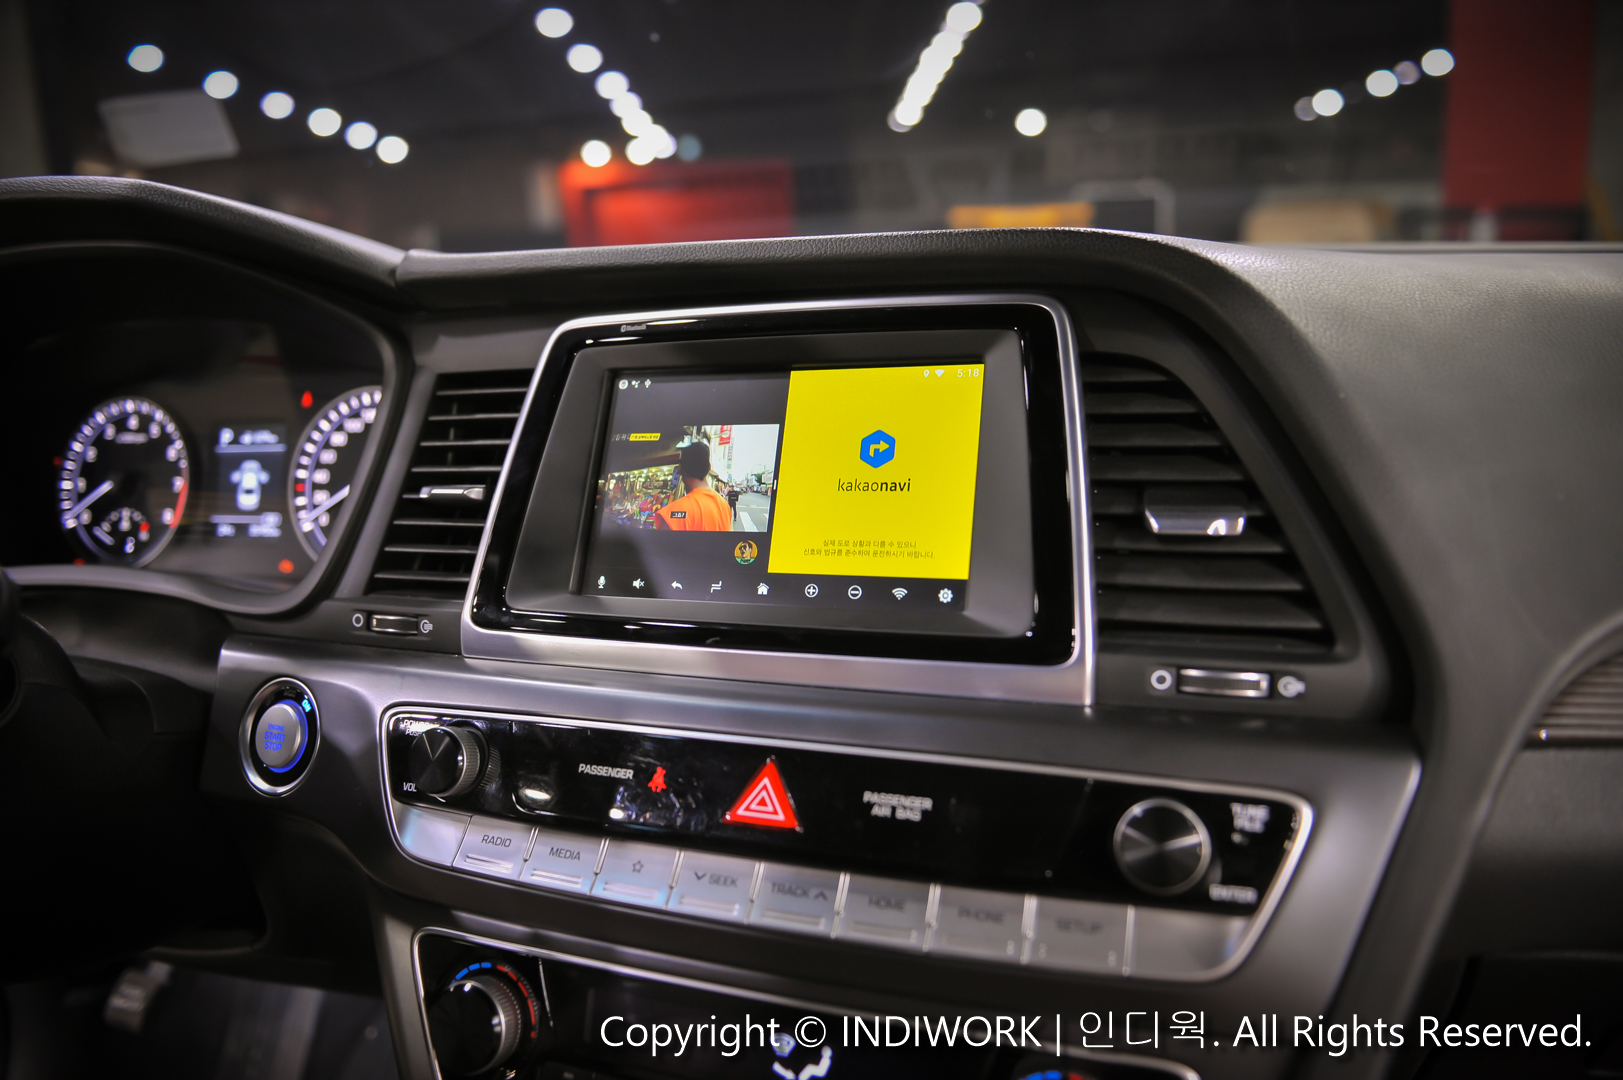 Android System for 2017 Sonata New Rise "A-LINK2"